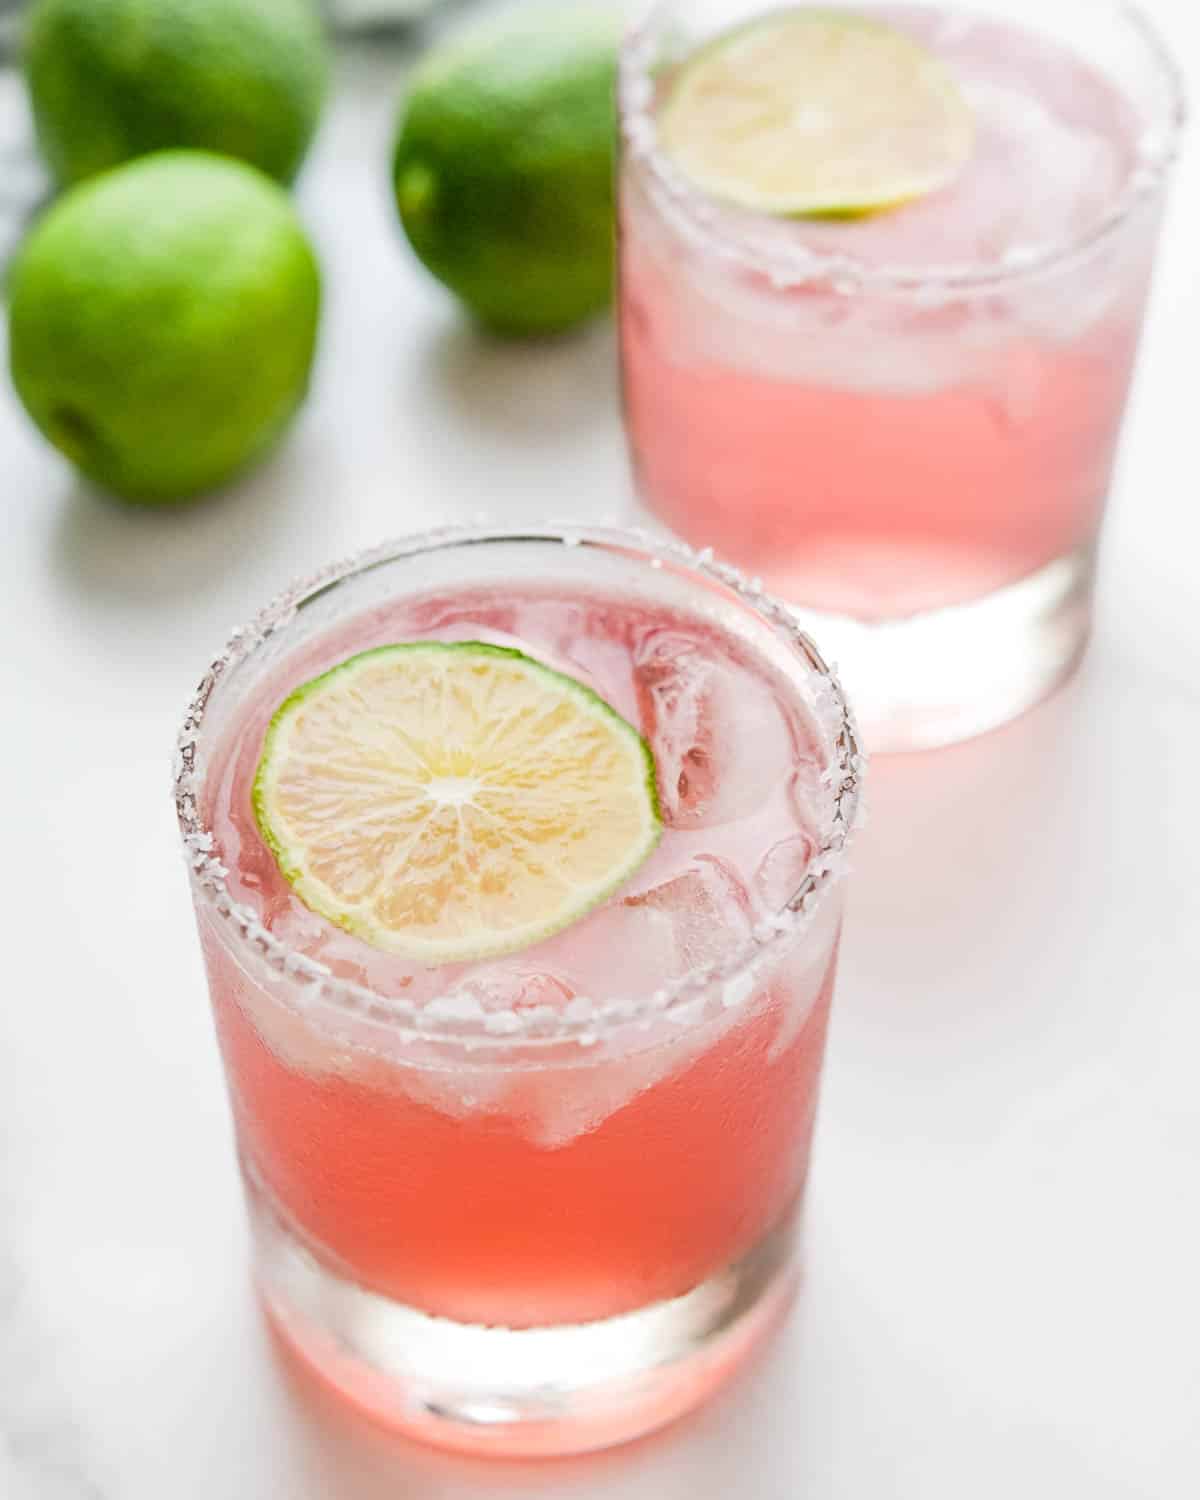 Floating a lime in the hibiscus margarita to serve.